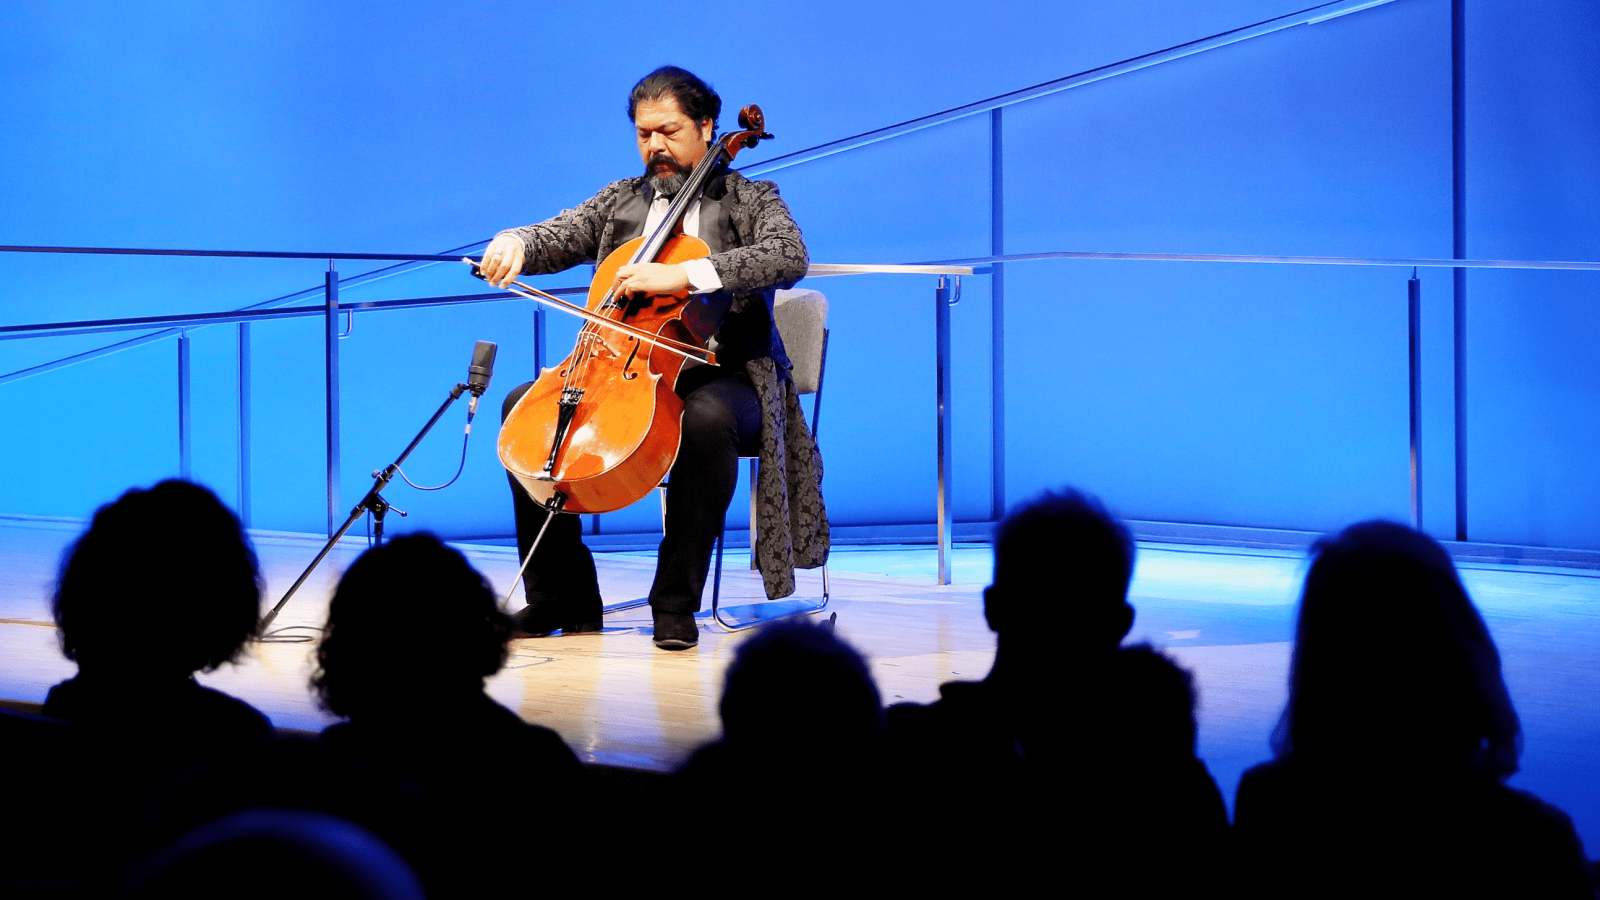 AESTRO KARIM WASFI, THE THE FORMER CONDUCTOR OF THE IRAQ SYMPHONY ORCHESTRA, PERFORMING AT THE 9/11 MEMORIAL MUSEUM